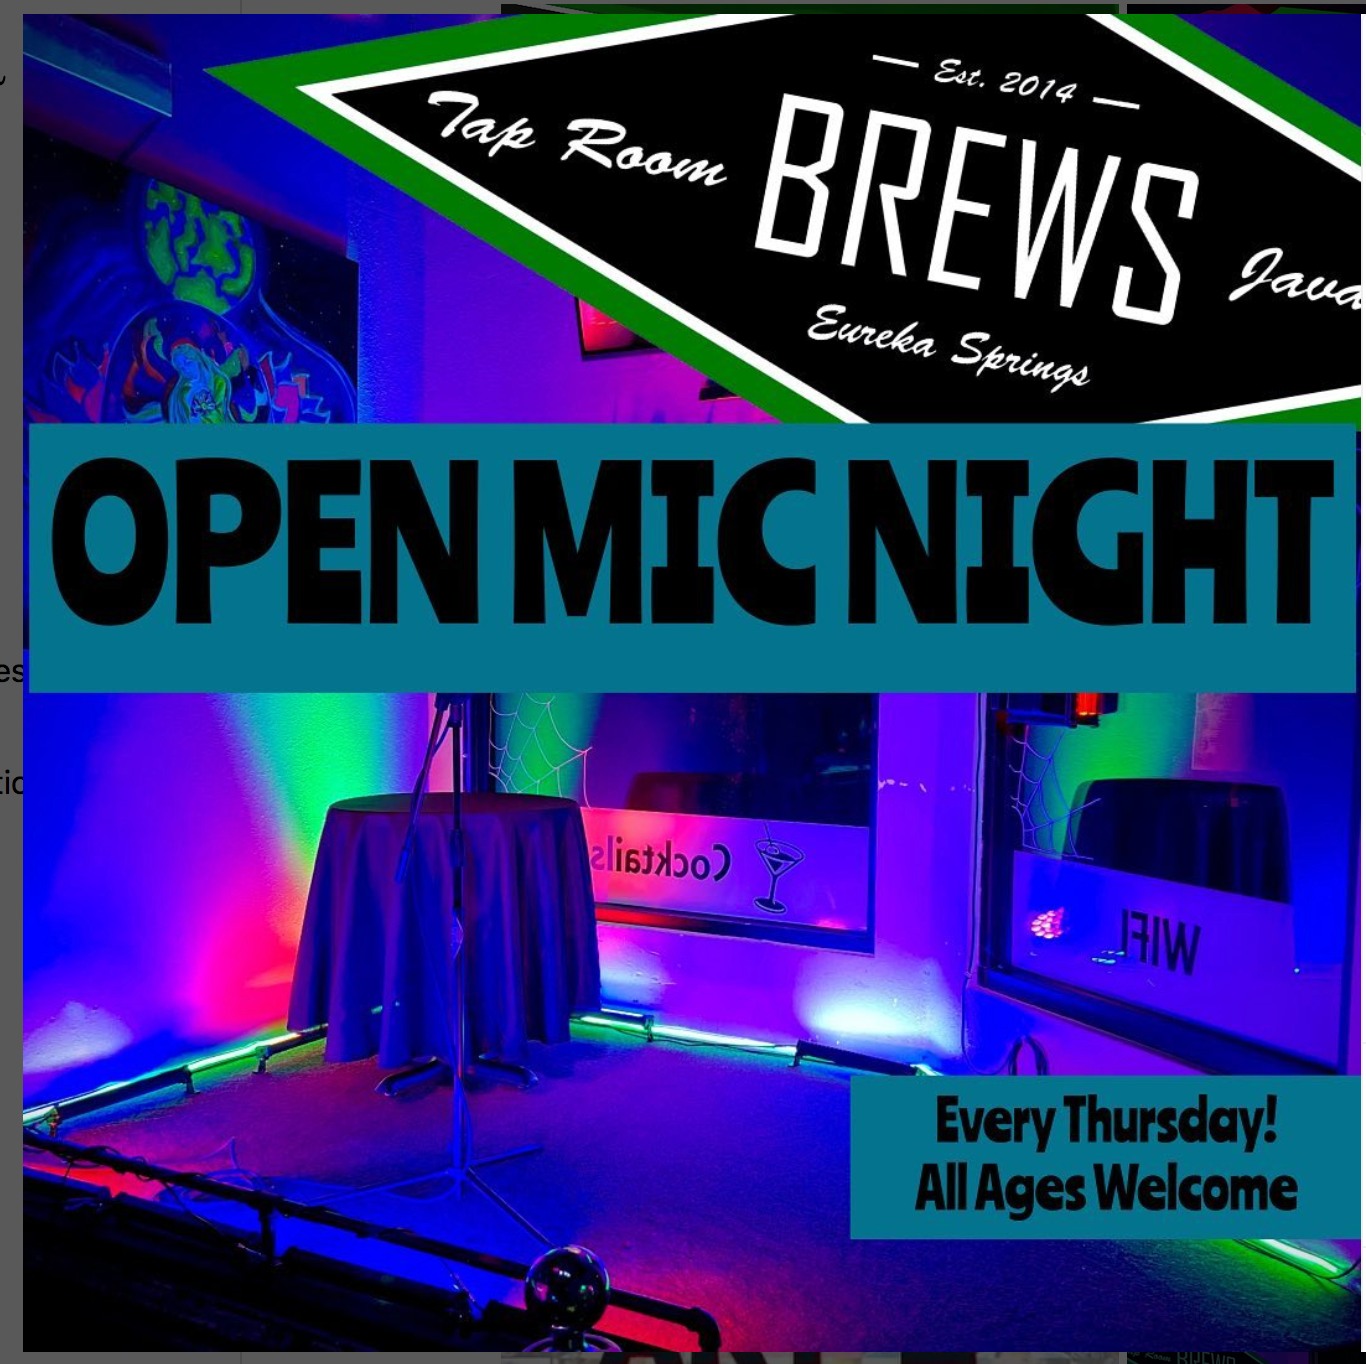 Featured image for “Open Mic Night at Brews”